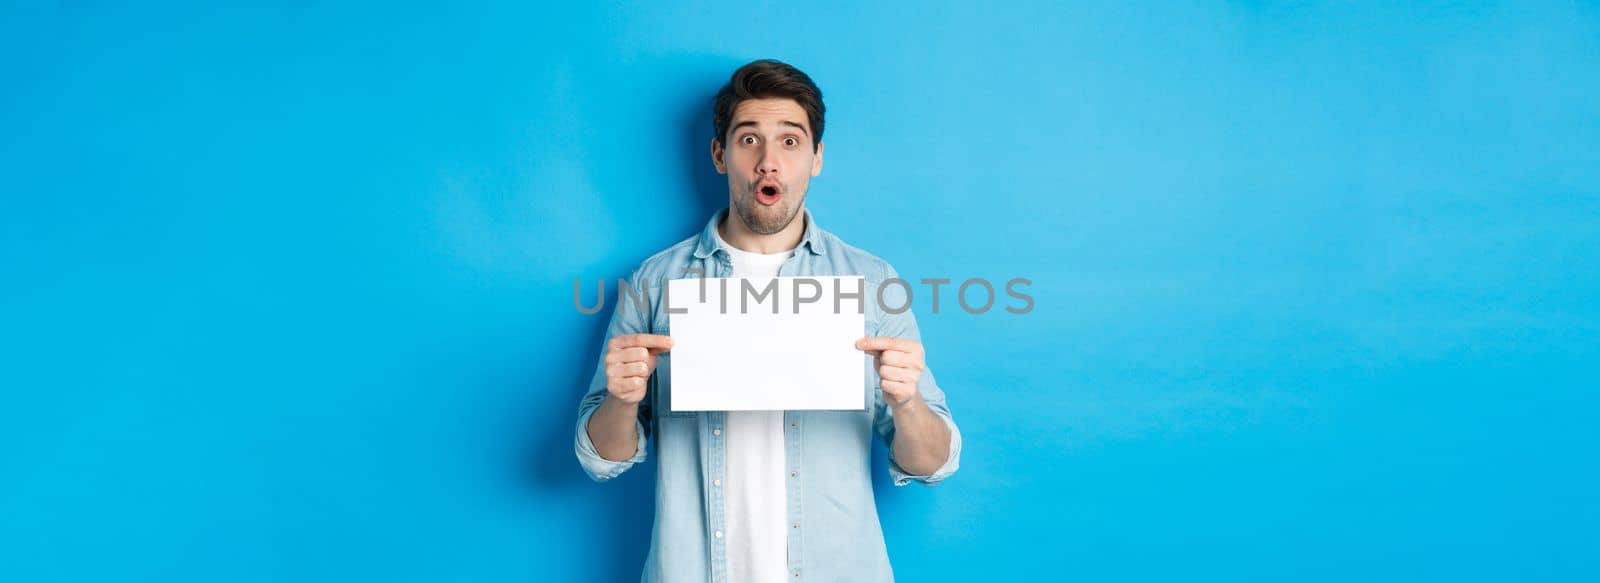 Surprised man gasping and looking impressed at camera, showing blank piece of paper for your sign, standing over blue background.